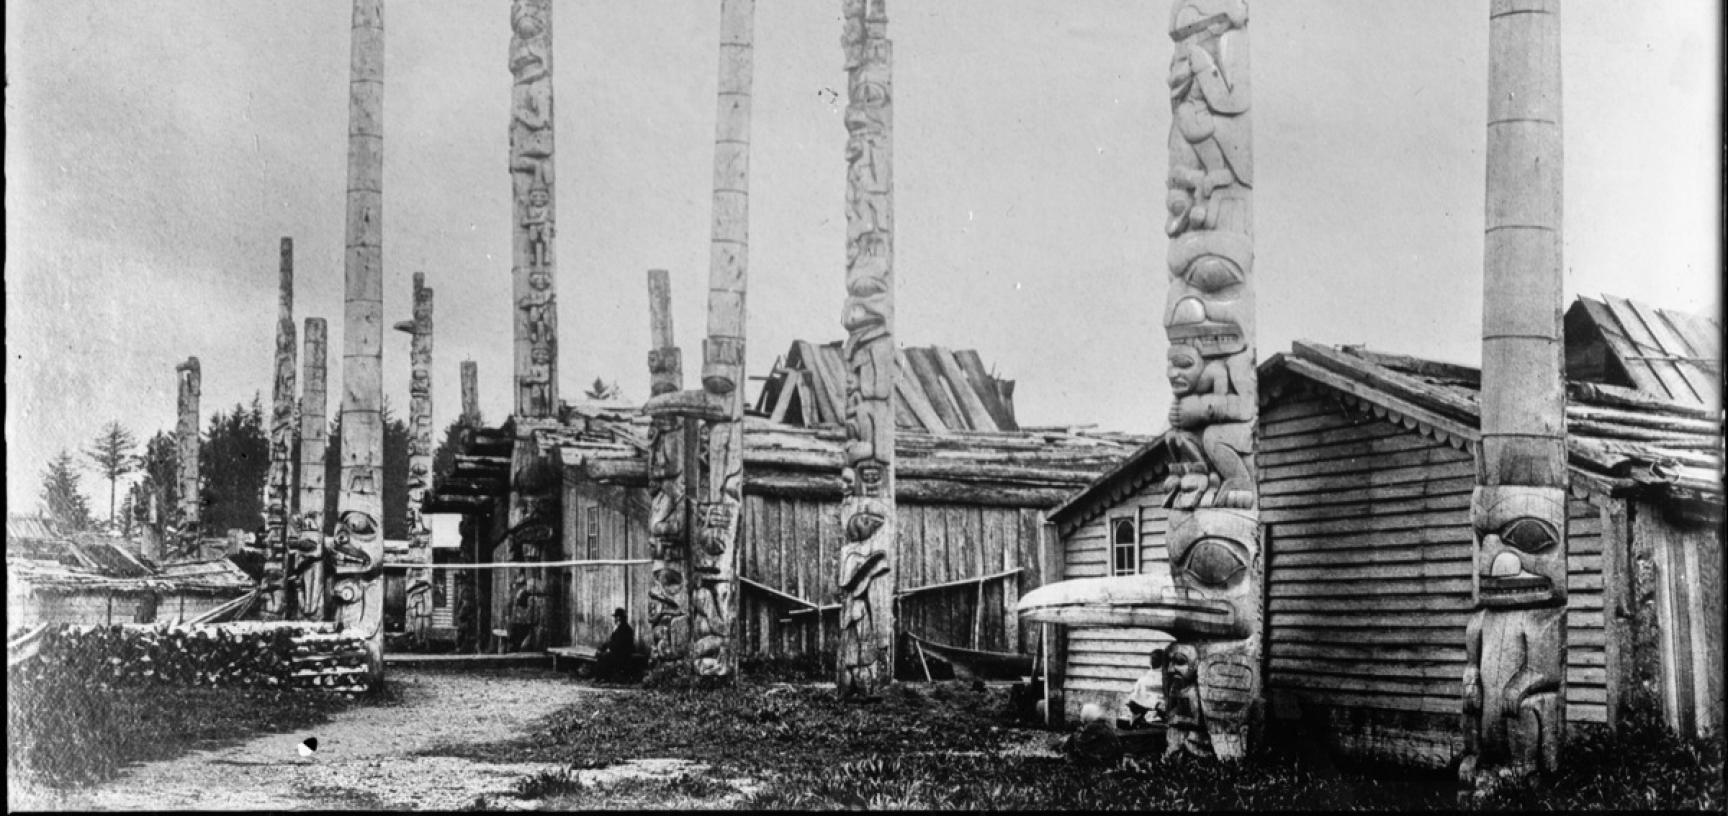 View of houses and totem poles at Masset village, with the frontal post of Star House in the foreground, now located in the Pitt Rivers Museum. Photograph by Bertram Buxton. Masset, Haida Gwaii, Canada. 1882. (Copyright Pitt Rivers Museum, University of O